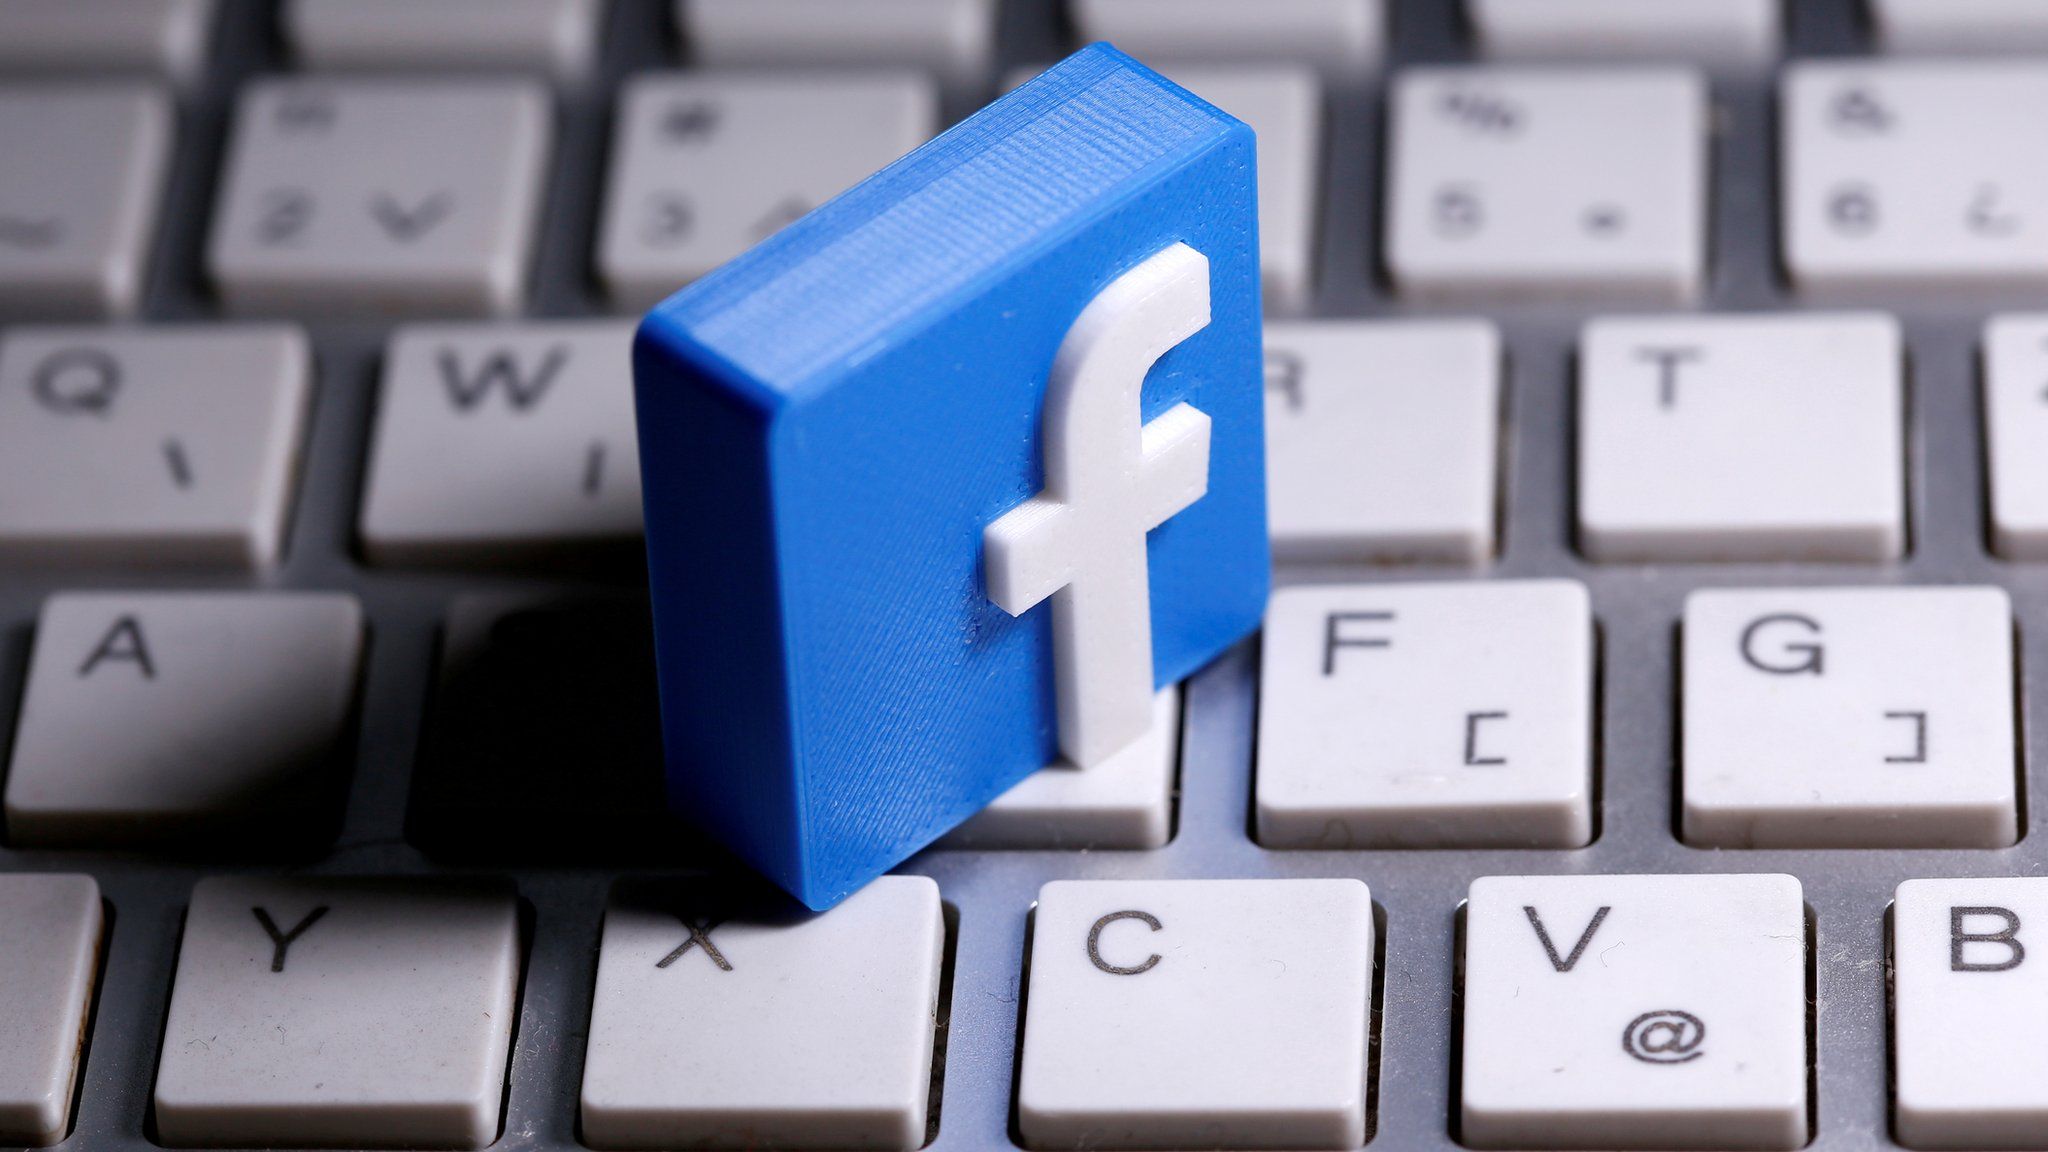 3D-printed Facebook logo is seen placed on a keyboard in this illustration taken March 25, 2020.